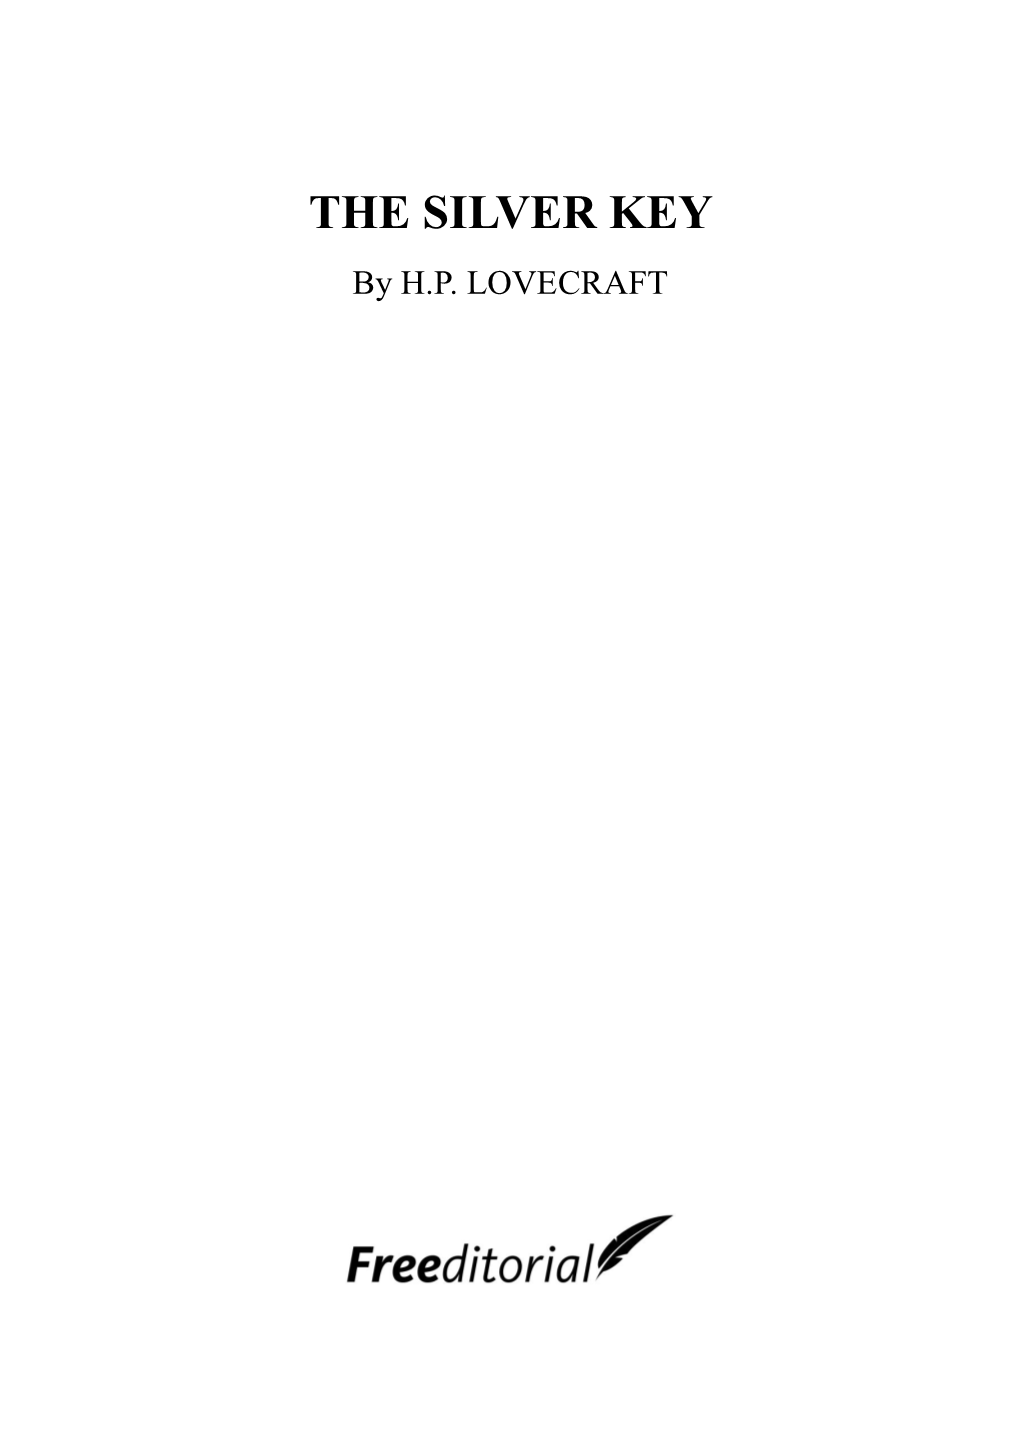 THE SILVER KEY by H.P